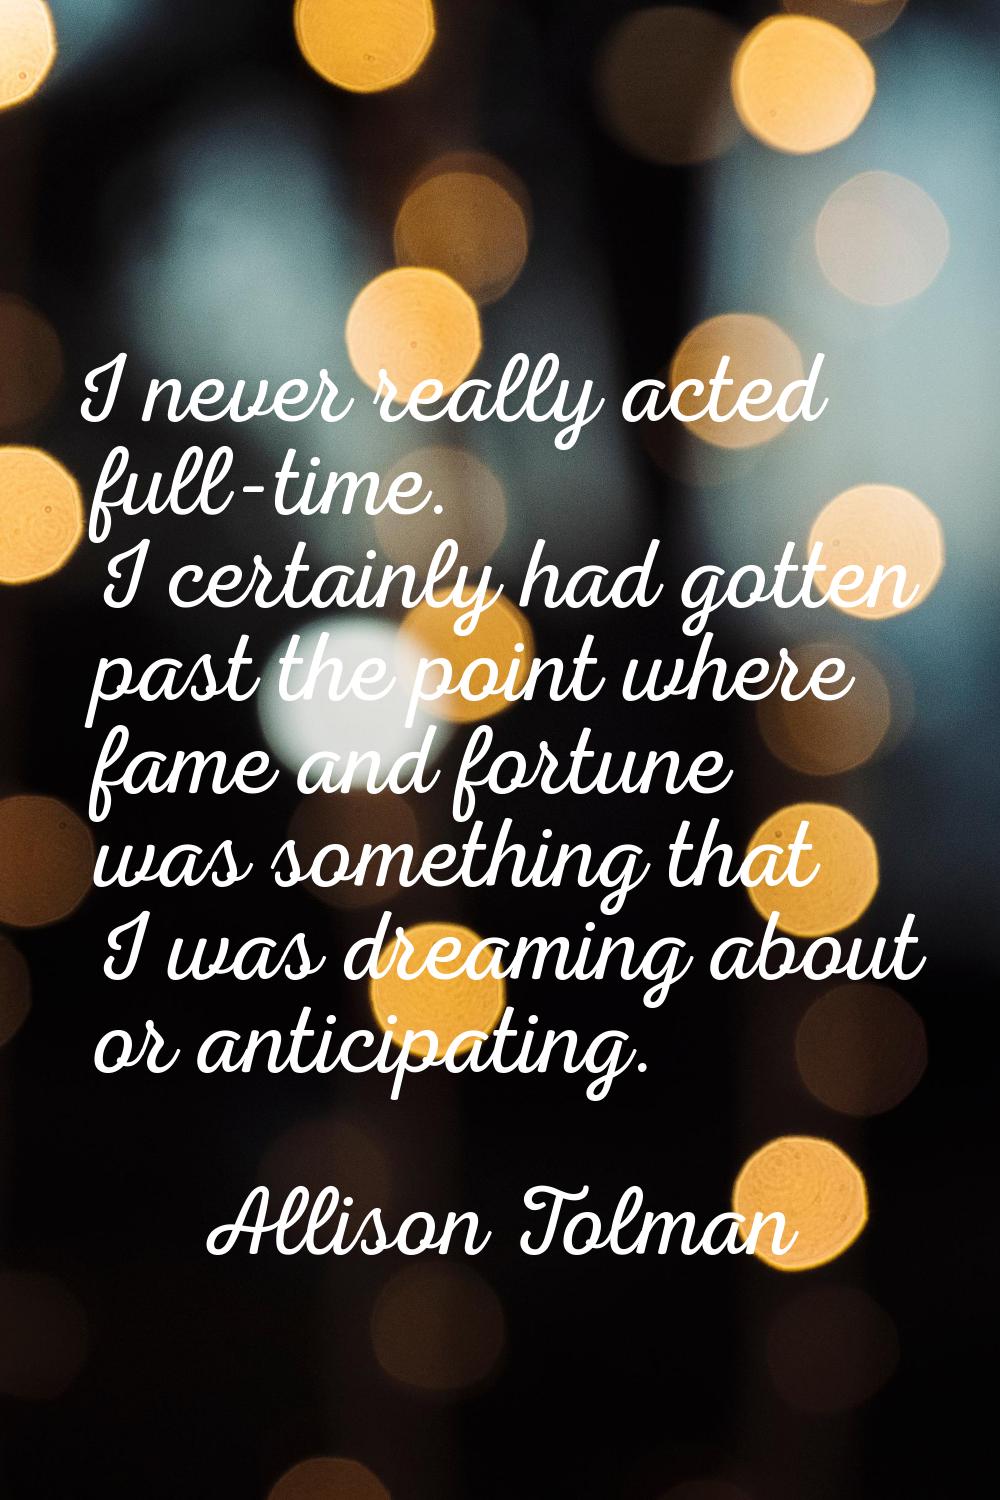 I never really acted full-time. I certainly had gotten past the point where fame and fortune was so